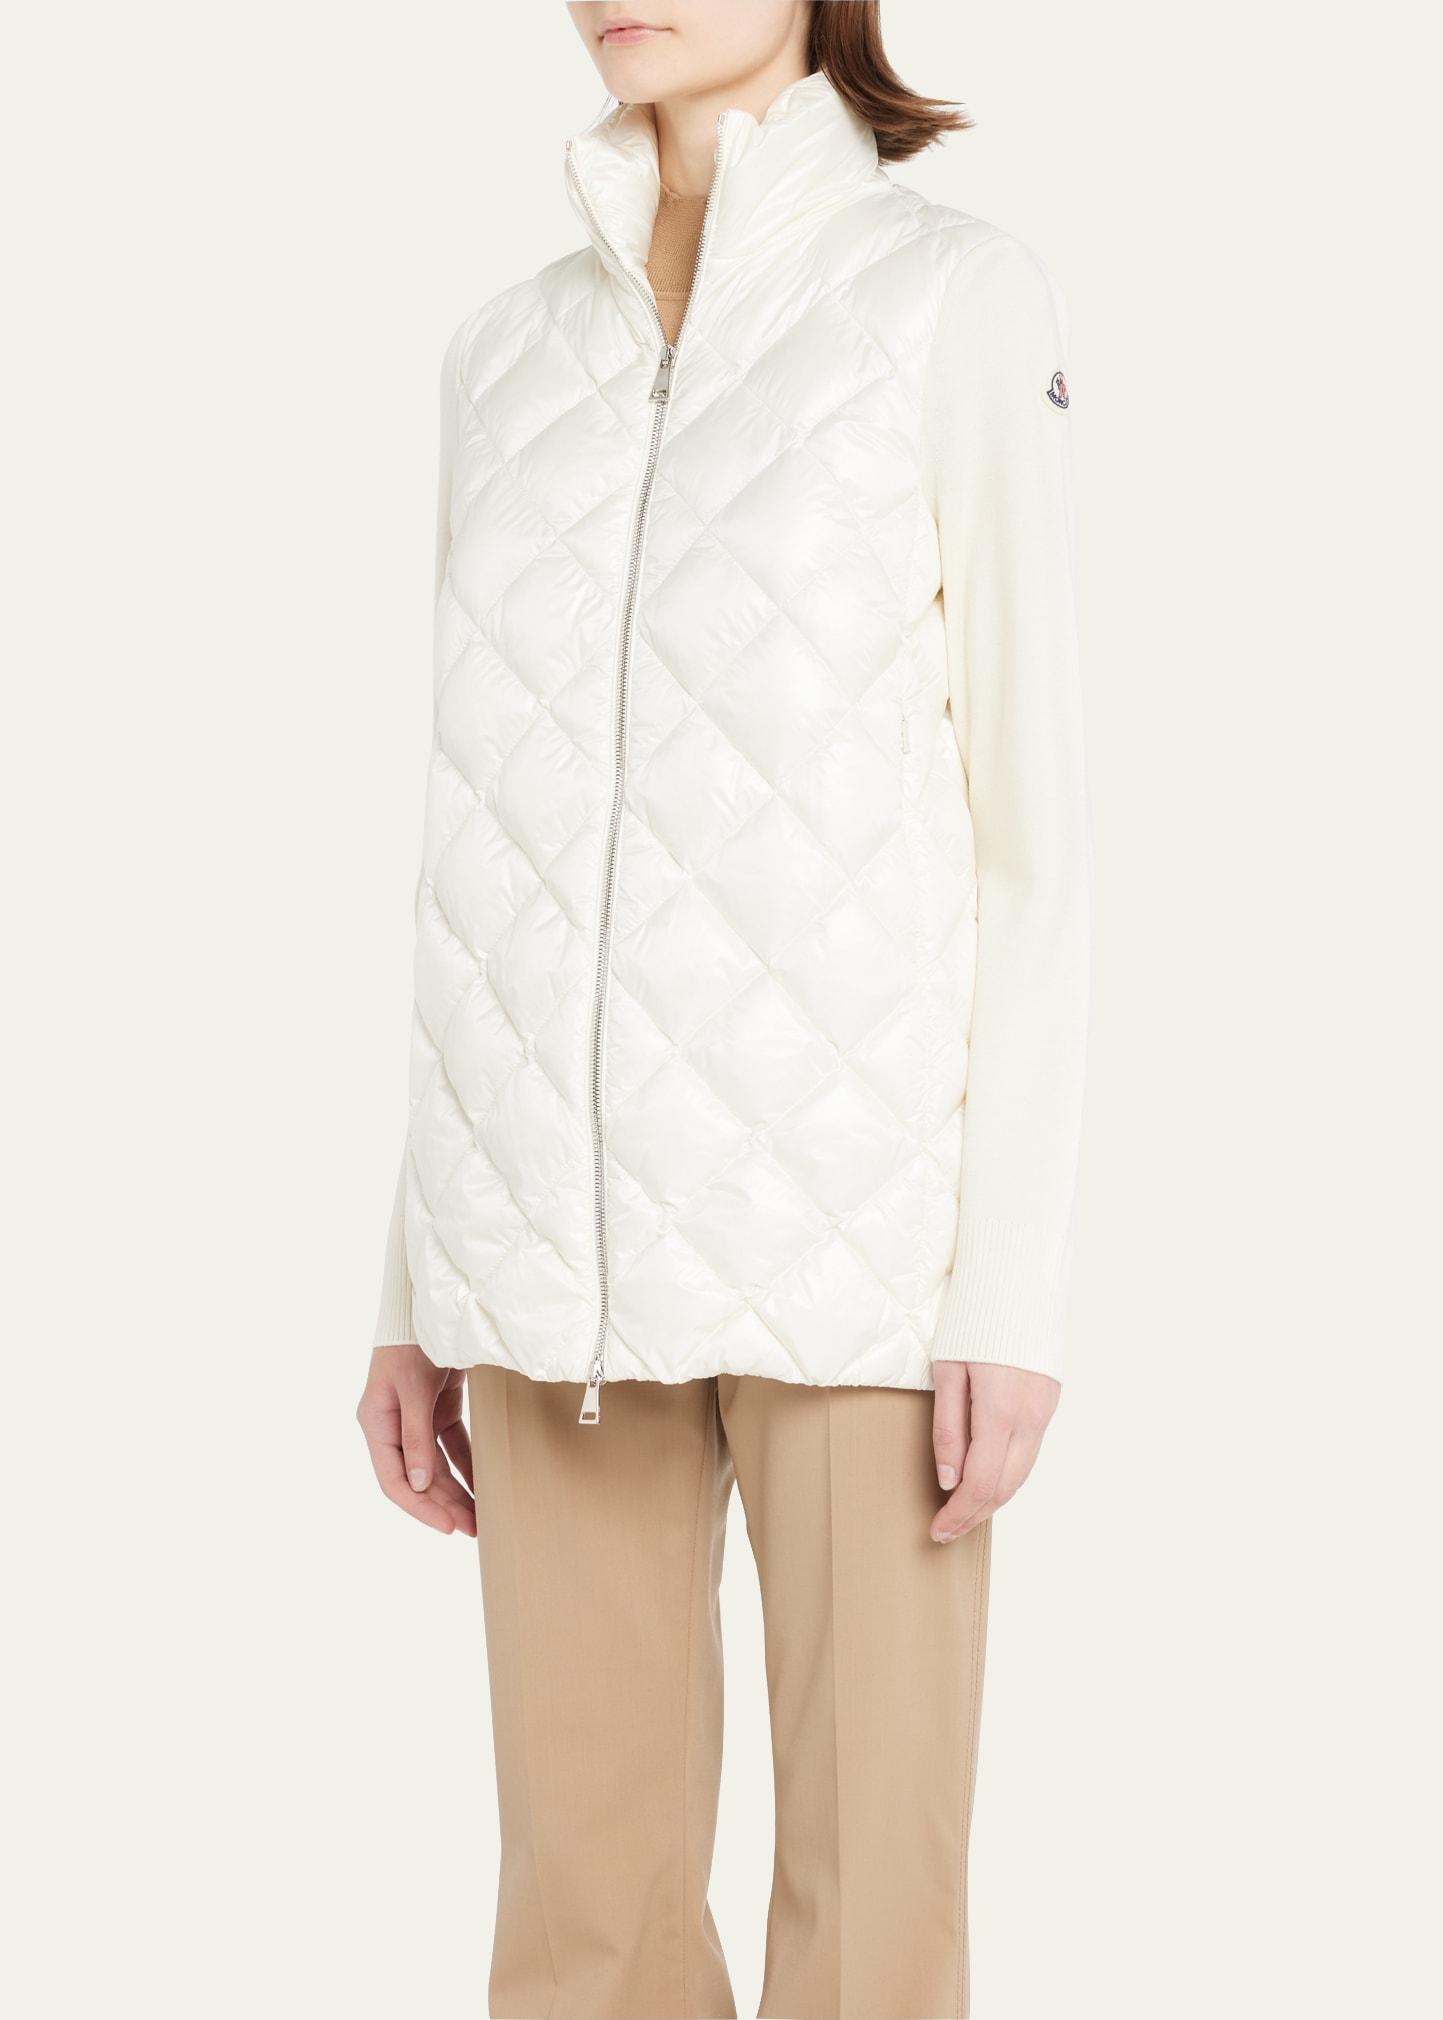 Moncler Mixed Media Cardigan in White | Lyst